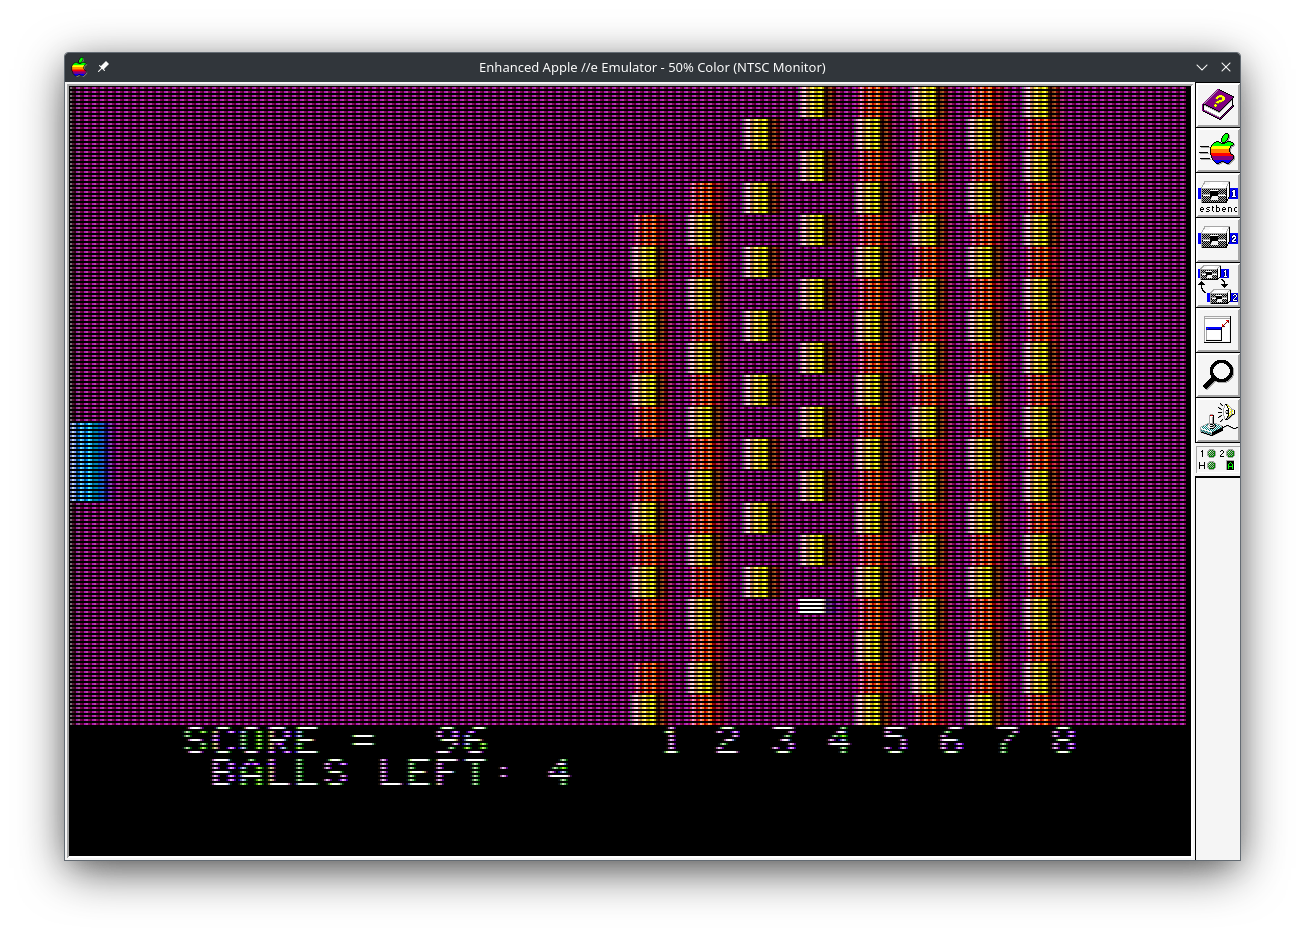 A screenshot of the Apple II emulator with a game of Breakout in progress